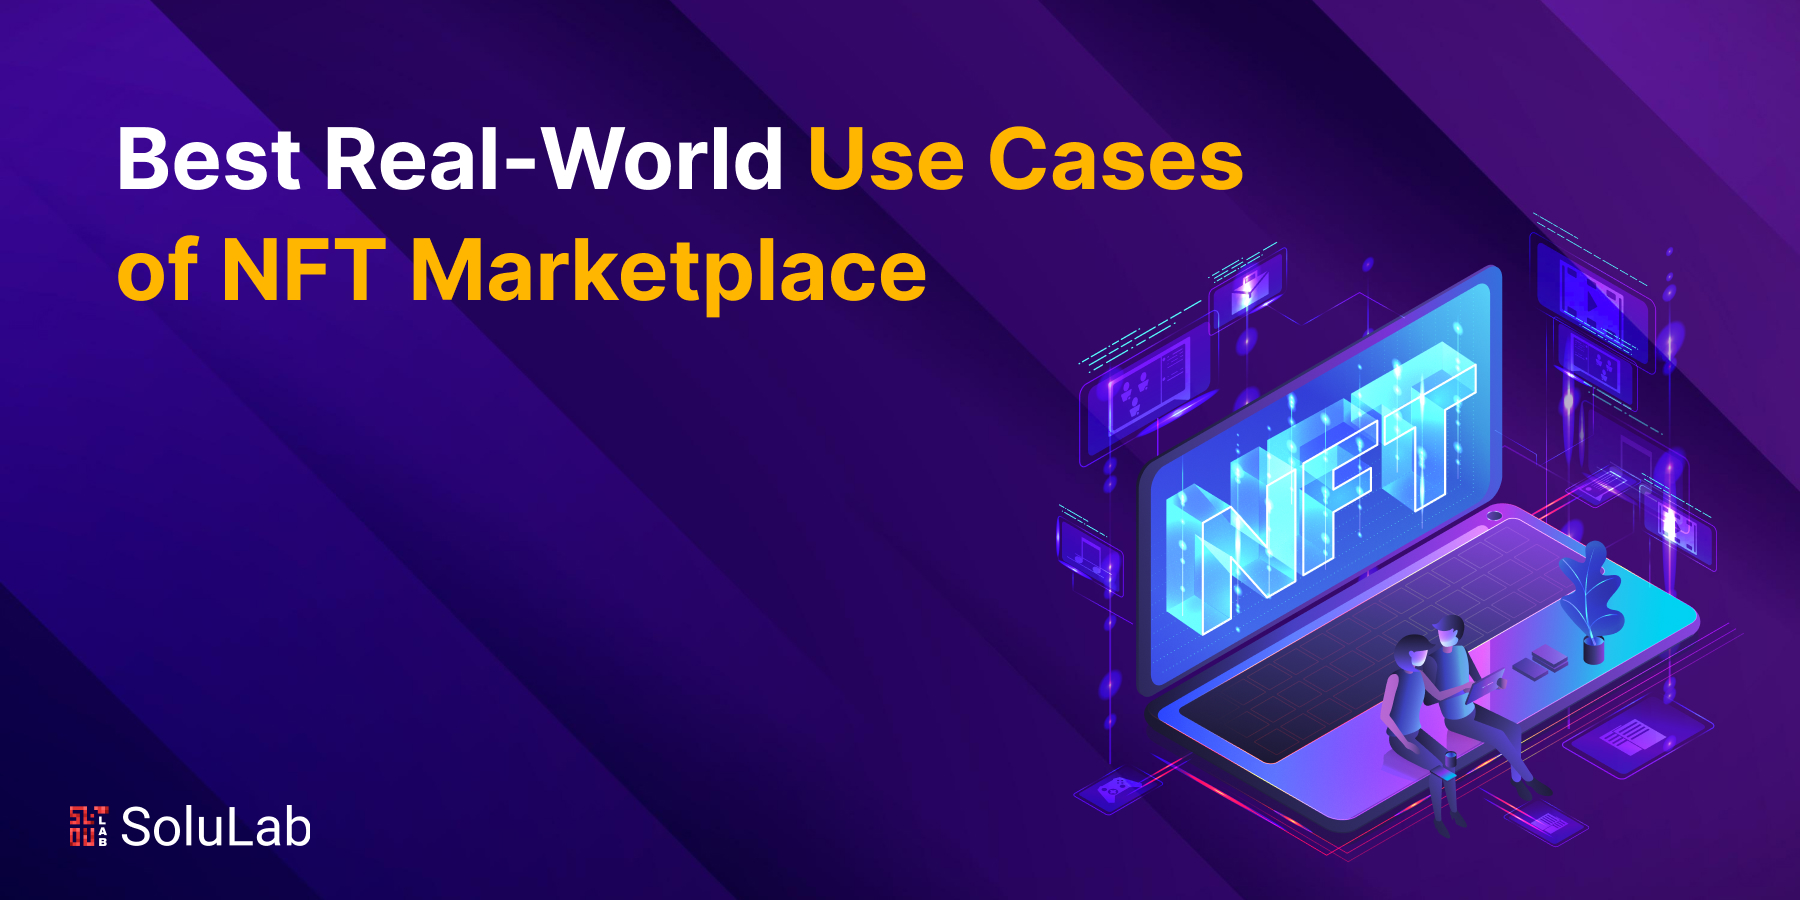 Best Real-World Use Cases of NFT Marketplace